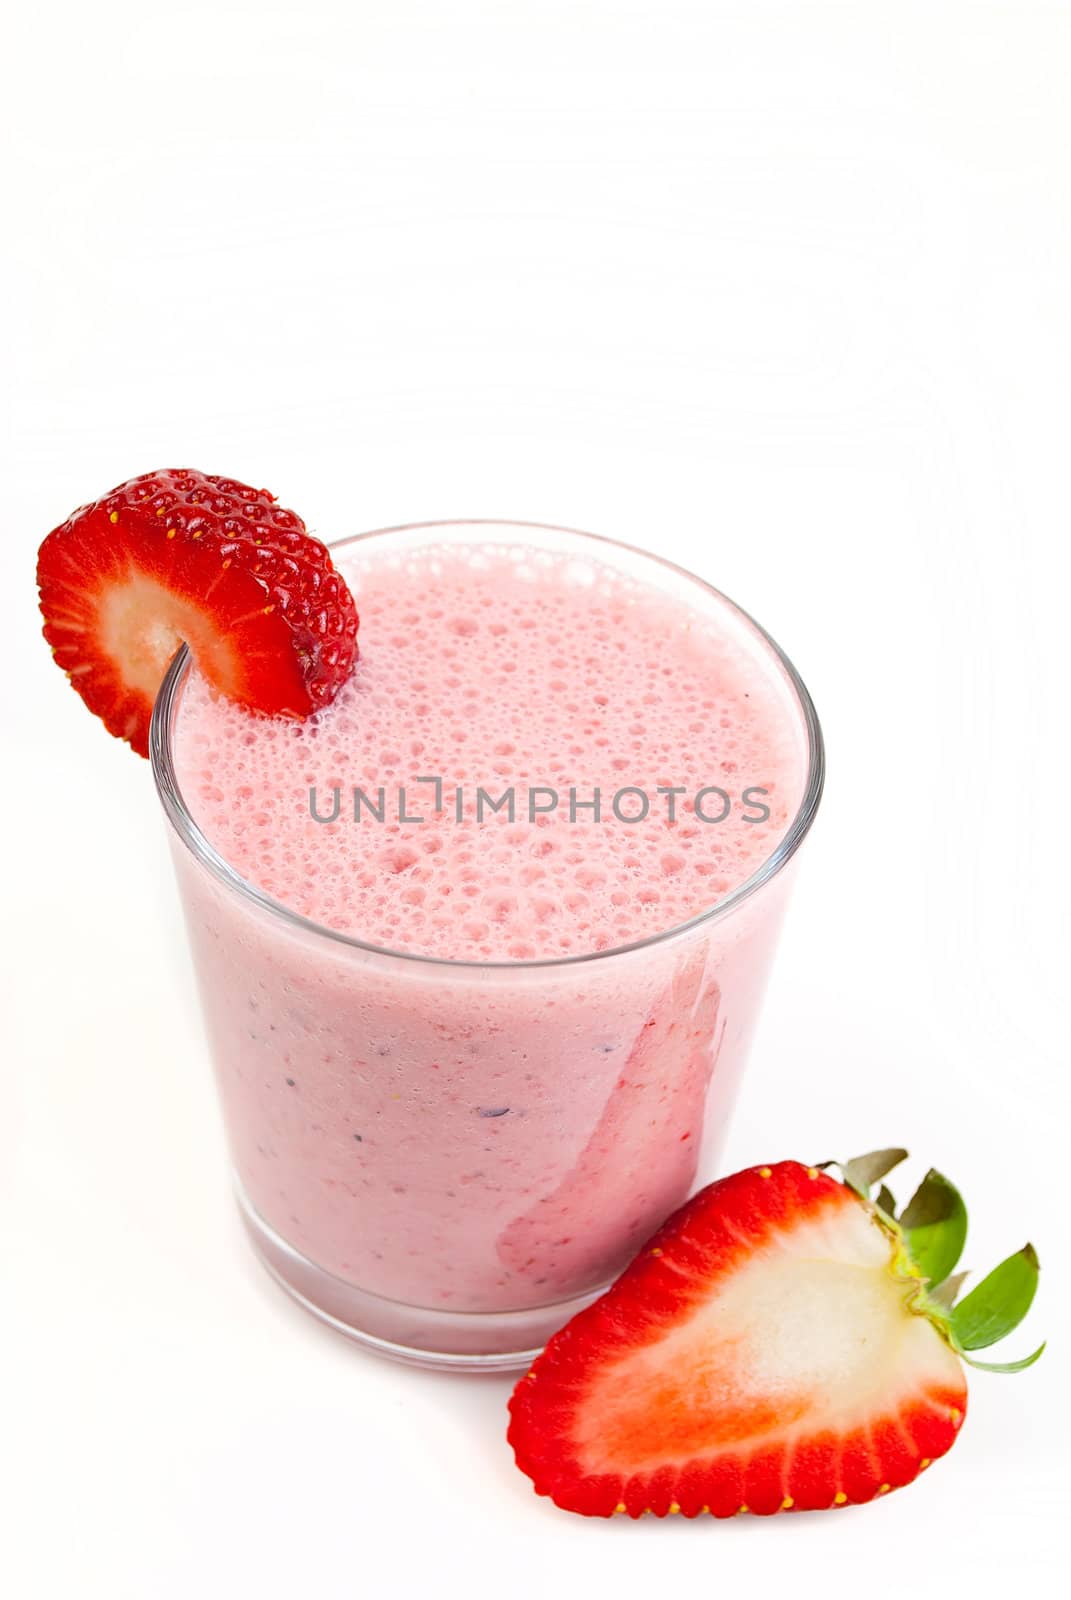 healthy strawberry smoothie isolated on white background